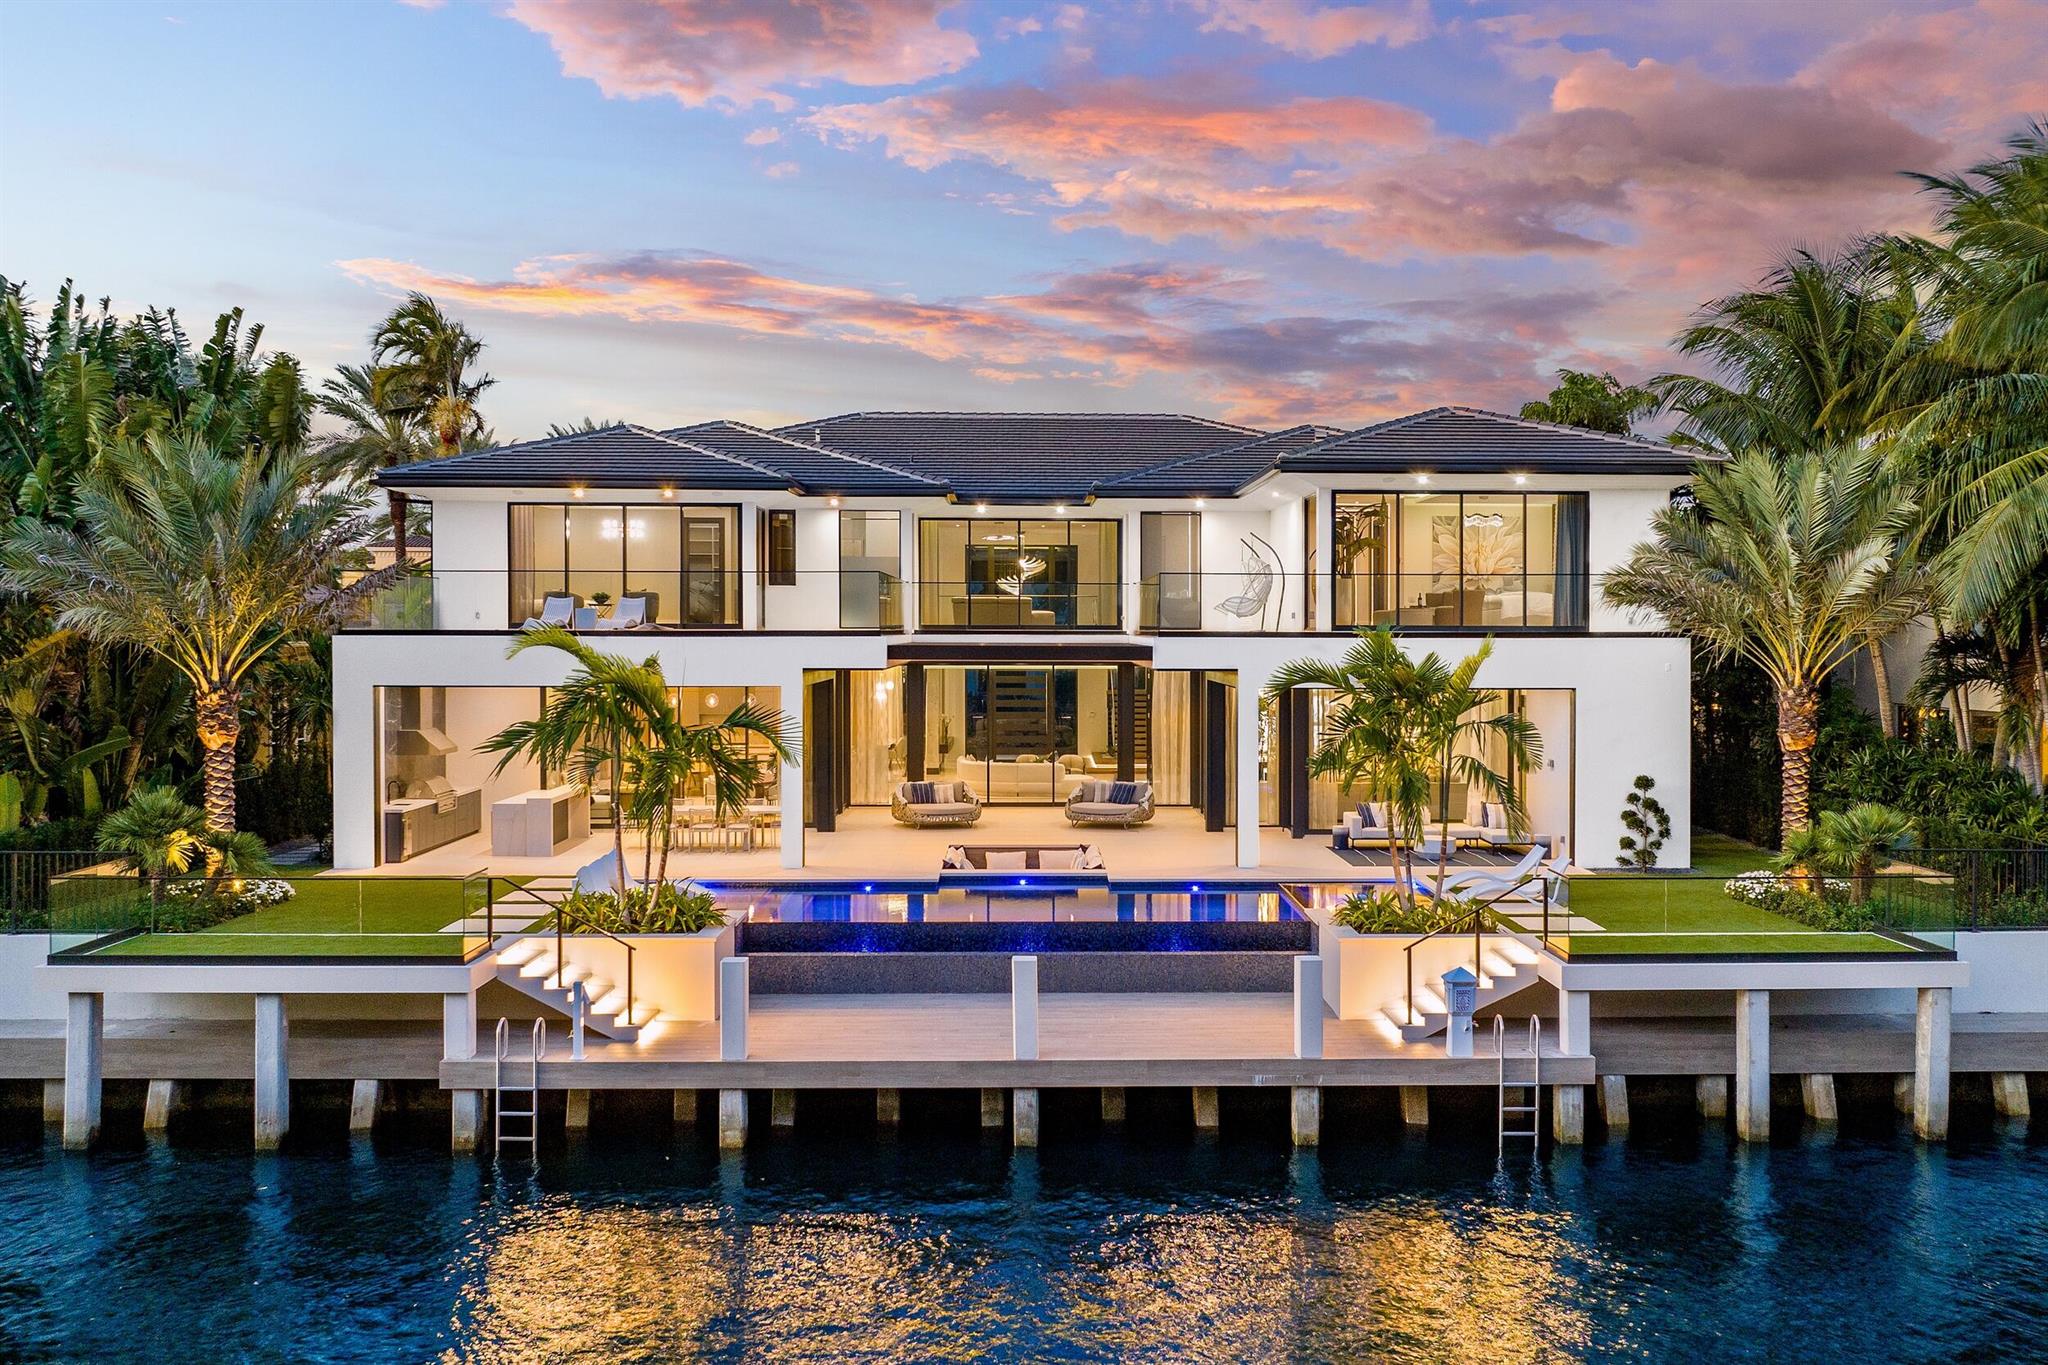 212 W Alexander Palm Rd | Brand new contemporary waterfront masterpiece sits on 100 ft of Royal Palm Waterway in Boca Raton's most prestigious community, Royal Palm Yacht & CC. Built by Albanese & Sons, Architecture by BE Designs, & Interiors by Zelman Design. This turnkey estate features 11,400 total sf. 6 BD's 8.1 BA's, Enter into 2 story Lit Foyer,the amazing Living Room w/ lavish private views of Capone Island. Private office, club room w/ bar & multiverse entertainment center and lavish wine room, 2-way marble fireplace, formal dining, family Rm leads to dream chef's kitchen w/ luxury appliances, 4-car plus golf. 2nd Floor Primary Suite, Wellness Rm w/sauna & Steam Shower, Gym. Southern Exposure W/Infinity Edge Pool & Spa, Sunken Fire Pit, Control 4 smart House,Generator & Elevator. First Floor:
- En-Suite guest room
- 3 BA's (Including a Full Cabana Bath)
- 2 Story Grand Foyer w/ Full Slab Porcelain Floors w/ Granite Accents
- Family Room adjacent to Dream Chef's Kitchen
- Butler's Pantry next to full Wolf, Gaggenau Appliances
- Theater Room with Full Bar &amp; Entertainment Center
- Club Room-Bar nook w/ Scotsman Ice Maker
- Wine Cellar- 2 Way-Fireplace
- Great room-Overlooking Spa/Infinity Pool
- Formal Dinning room with built in's
Control 4 Integrated Smart House
- 2 Mechanical rooms

2nd Floor:
- 5 bedrooms En-suite Second Floor(wellness room 1-bedroom)
-Primary Bedroom with His &amp; Her Walk-In Closets
&amp; His and Her Separate Primary Bathrooms
- Morning bar, Wrap around balcony
- Bedroom 3-Wellness Room 3 with Balcony, Sauna, Steam Shower
- Gym/fully equipped With view of Infinity Pool
- VIP Bedroom 4 with view of Water and Infinity Pool Large walk around Balcony and walk in closet and bathroom
- Bedroom 5,6, large En-Suite Bedrooms with Walk in Closets
- Laundry room, 2 washer and Dryers

Exterior Features:
- 4 Car Garage w/ Epoxy Floors
-  Golf car
- Rear Terrace, Sunken Fire pit,
- Entertainment Center &amp; outdoor kitchen,
- Resort Style Heated Pool &amp; Spa
- Infinity Edge Swimming pool
- Full House Natural Gas Generator
- Covered Patio w/ Gas Fireplace, Built-In Grill
- Additional Features:
- One of the Most Luxurious Communities in Boca Raton
- 24 Hr. Security Patrol
- Minutes from "THE BOCA RATON" &amp; the Beach
- Minutes to Fine Dining, Shopping, Mizner, &amp; Mizner Amphitheater
- Minutes from I-95, and within 30 minutes from both Ft. Lauderdale &amp; West Palm Beach Airports

All images, layouts, floor-plans, fixtures, furniture, etc. are conceptual only and may change at any time without notice.